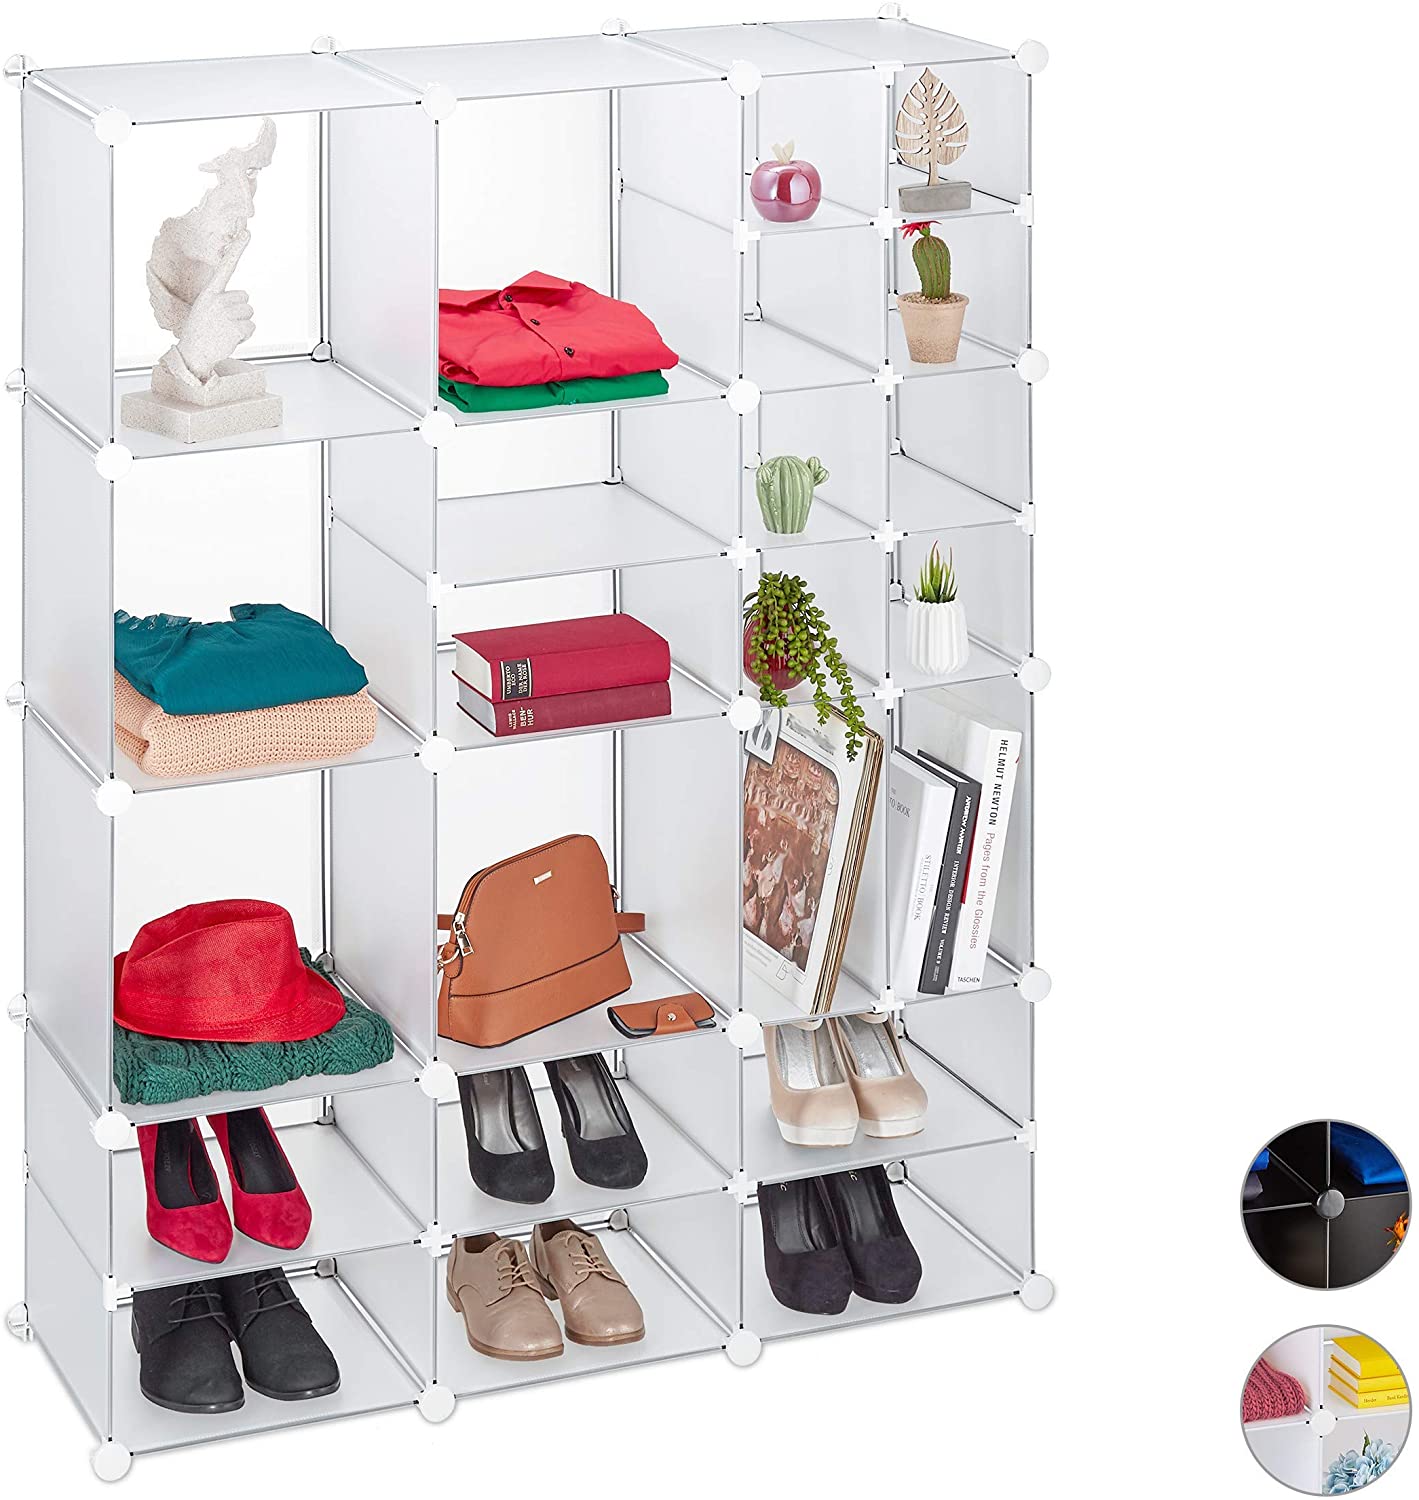 Relaxdays Shelving System 23 Compartments Large Open Diy Shelving Plastic R